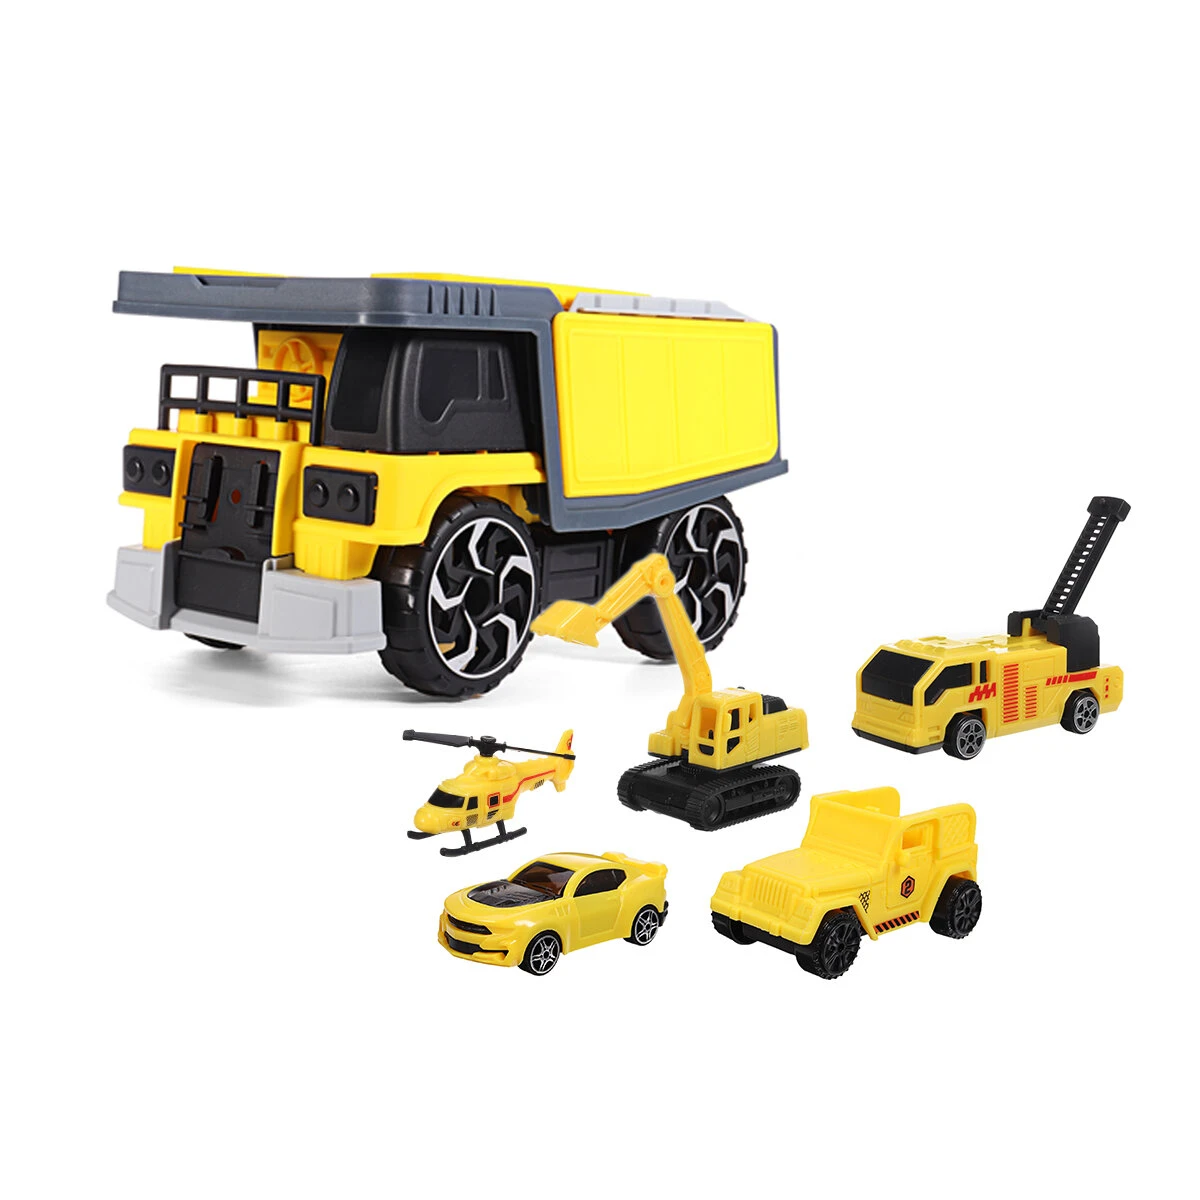 Simulation inertia deformation track engineering vehicle diecast car model toy with storage parking lot for kids birthdays gift